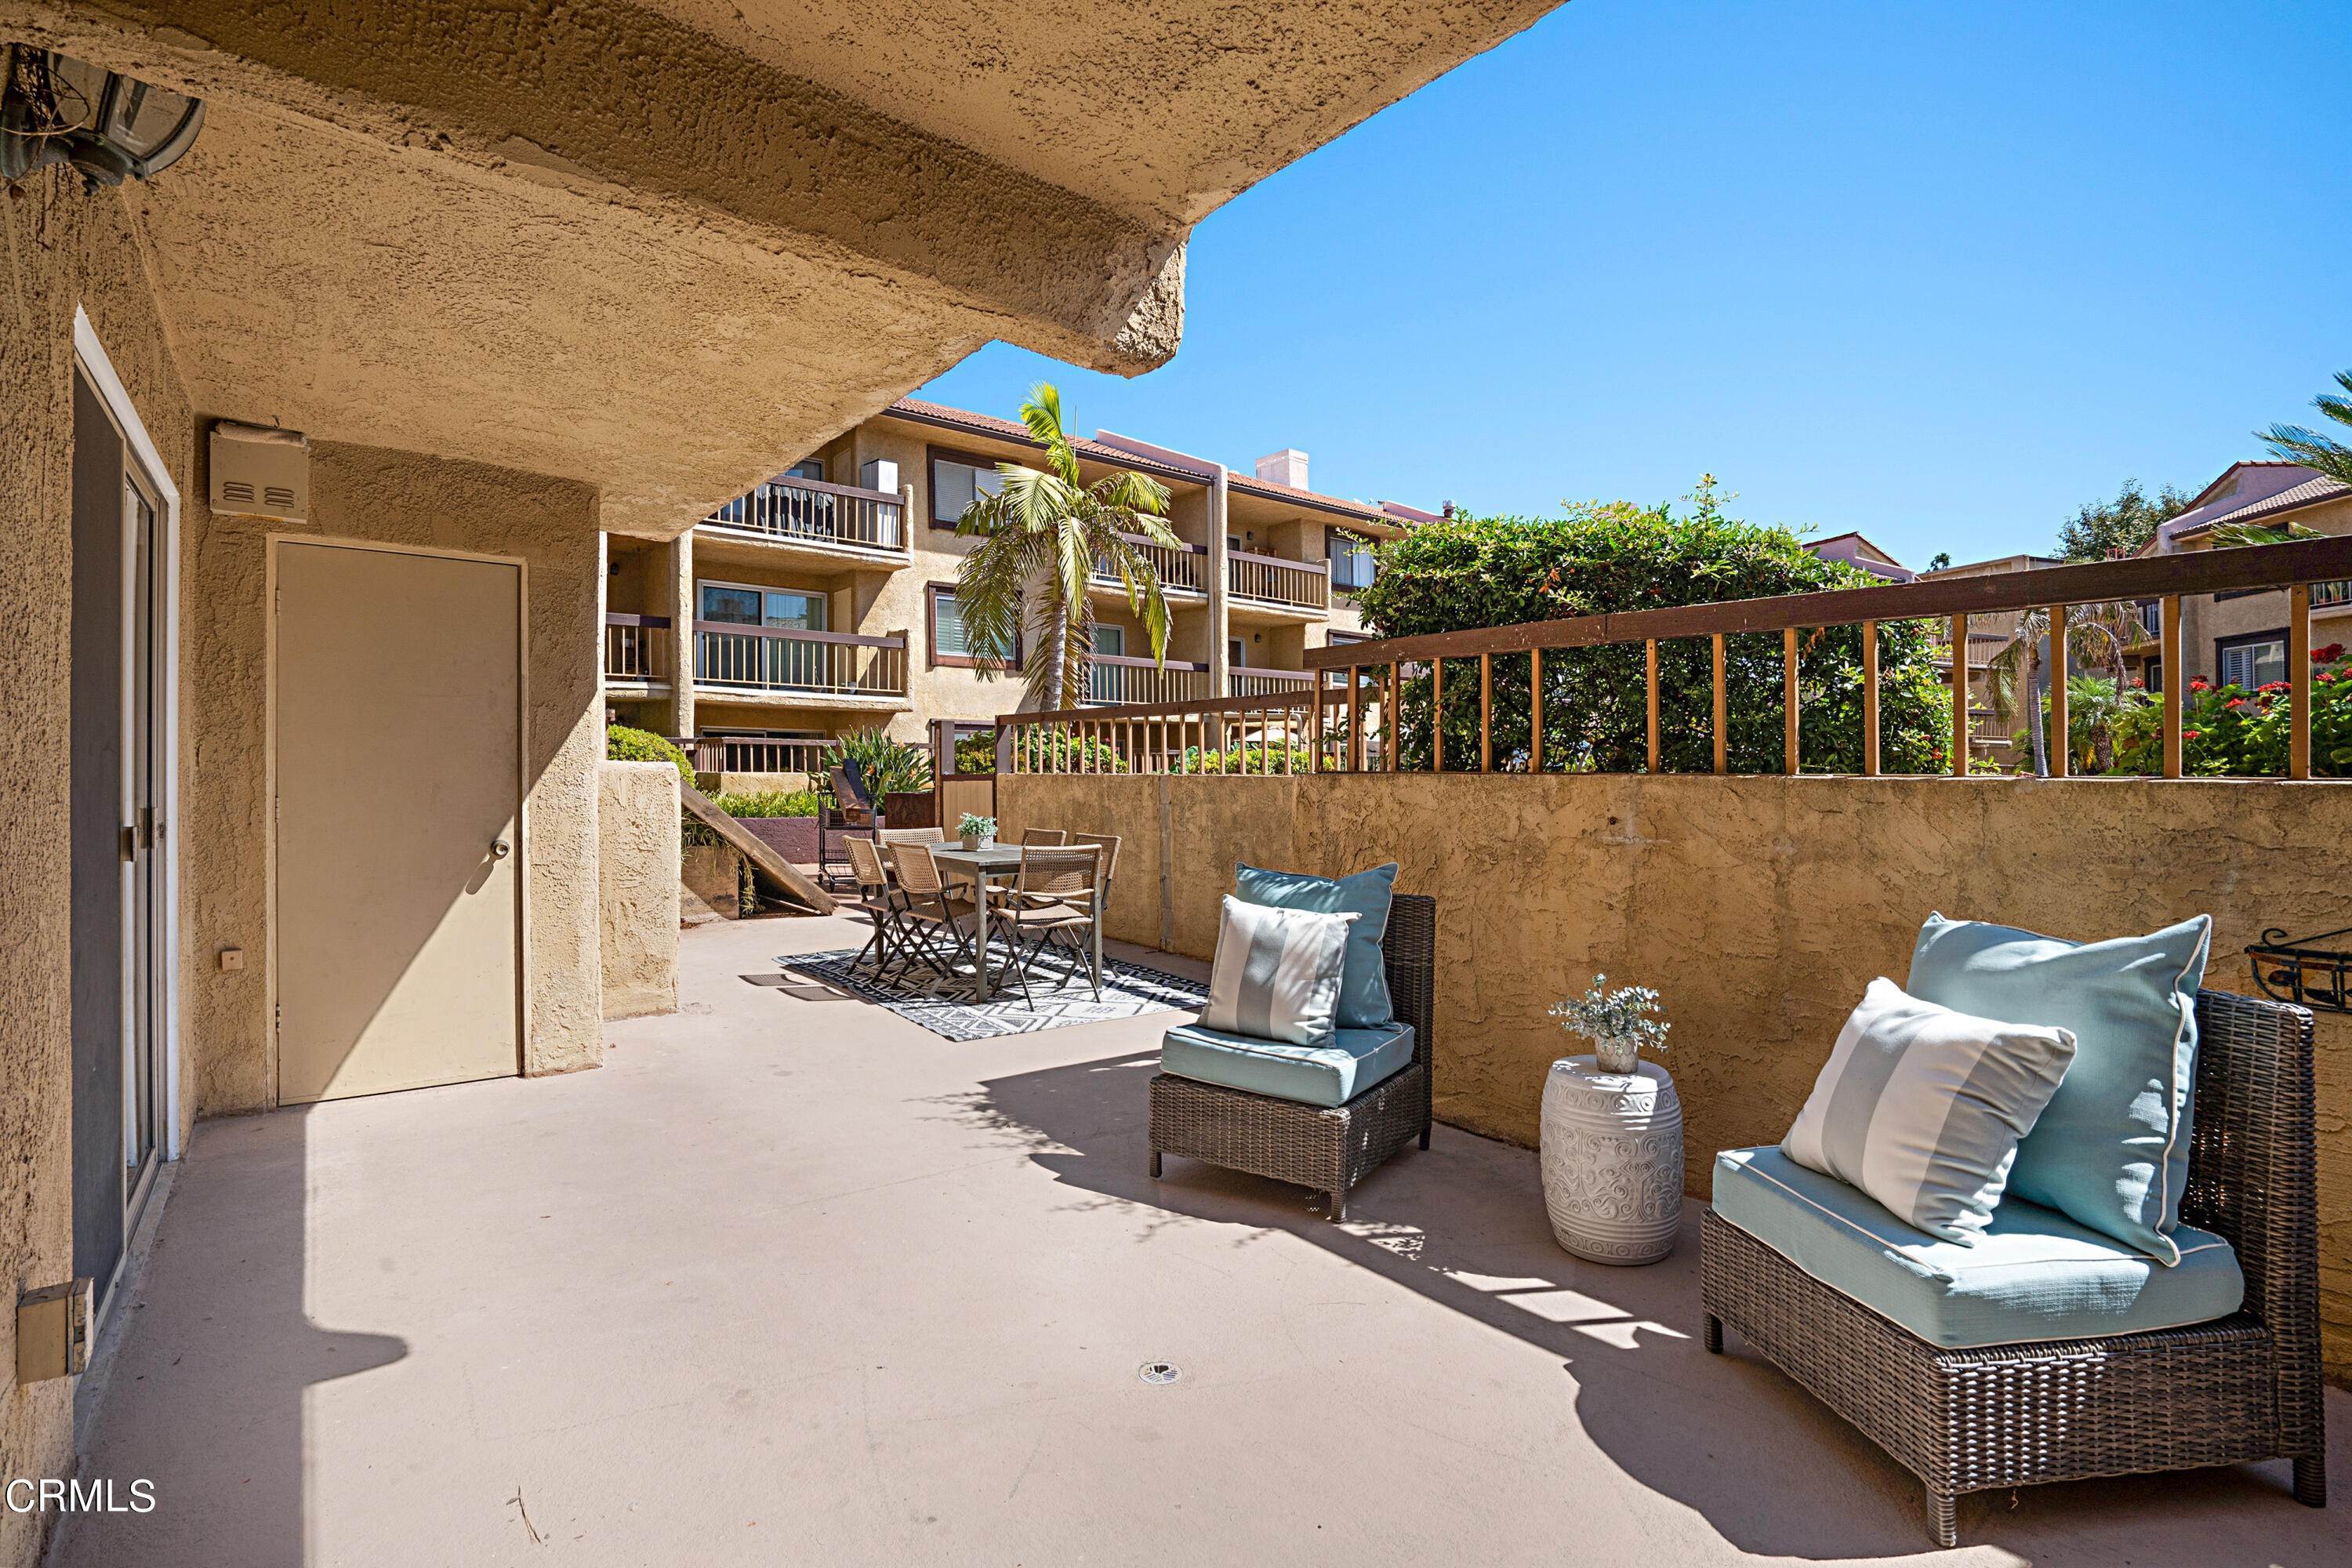 29. Condominiums for Sale at 3481 Stancrest Drive 115 #115 3481 Stancrest Drive 115 Glendale, California 91208 United States